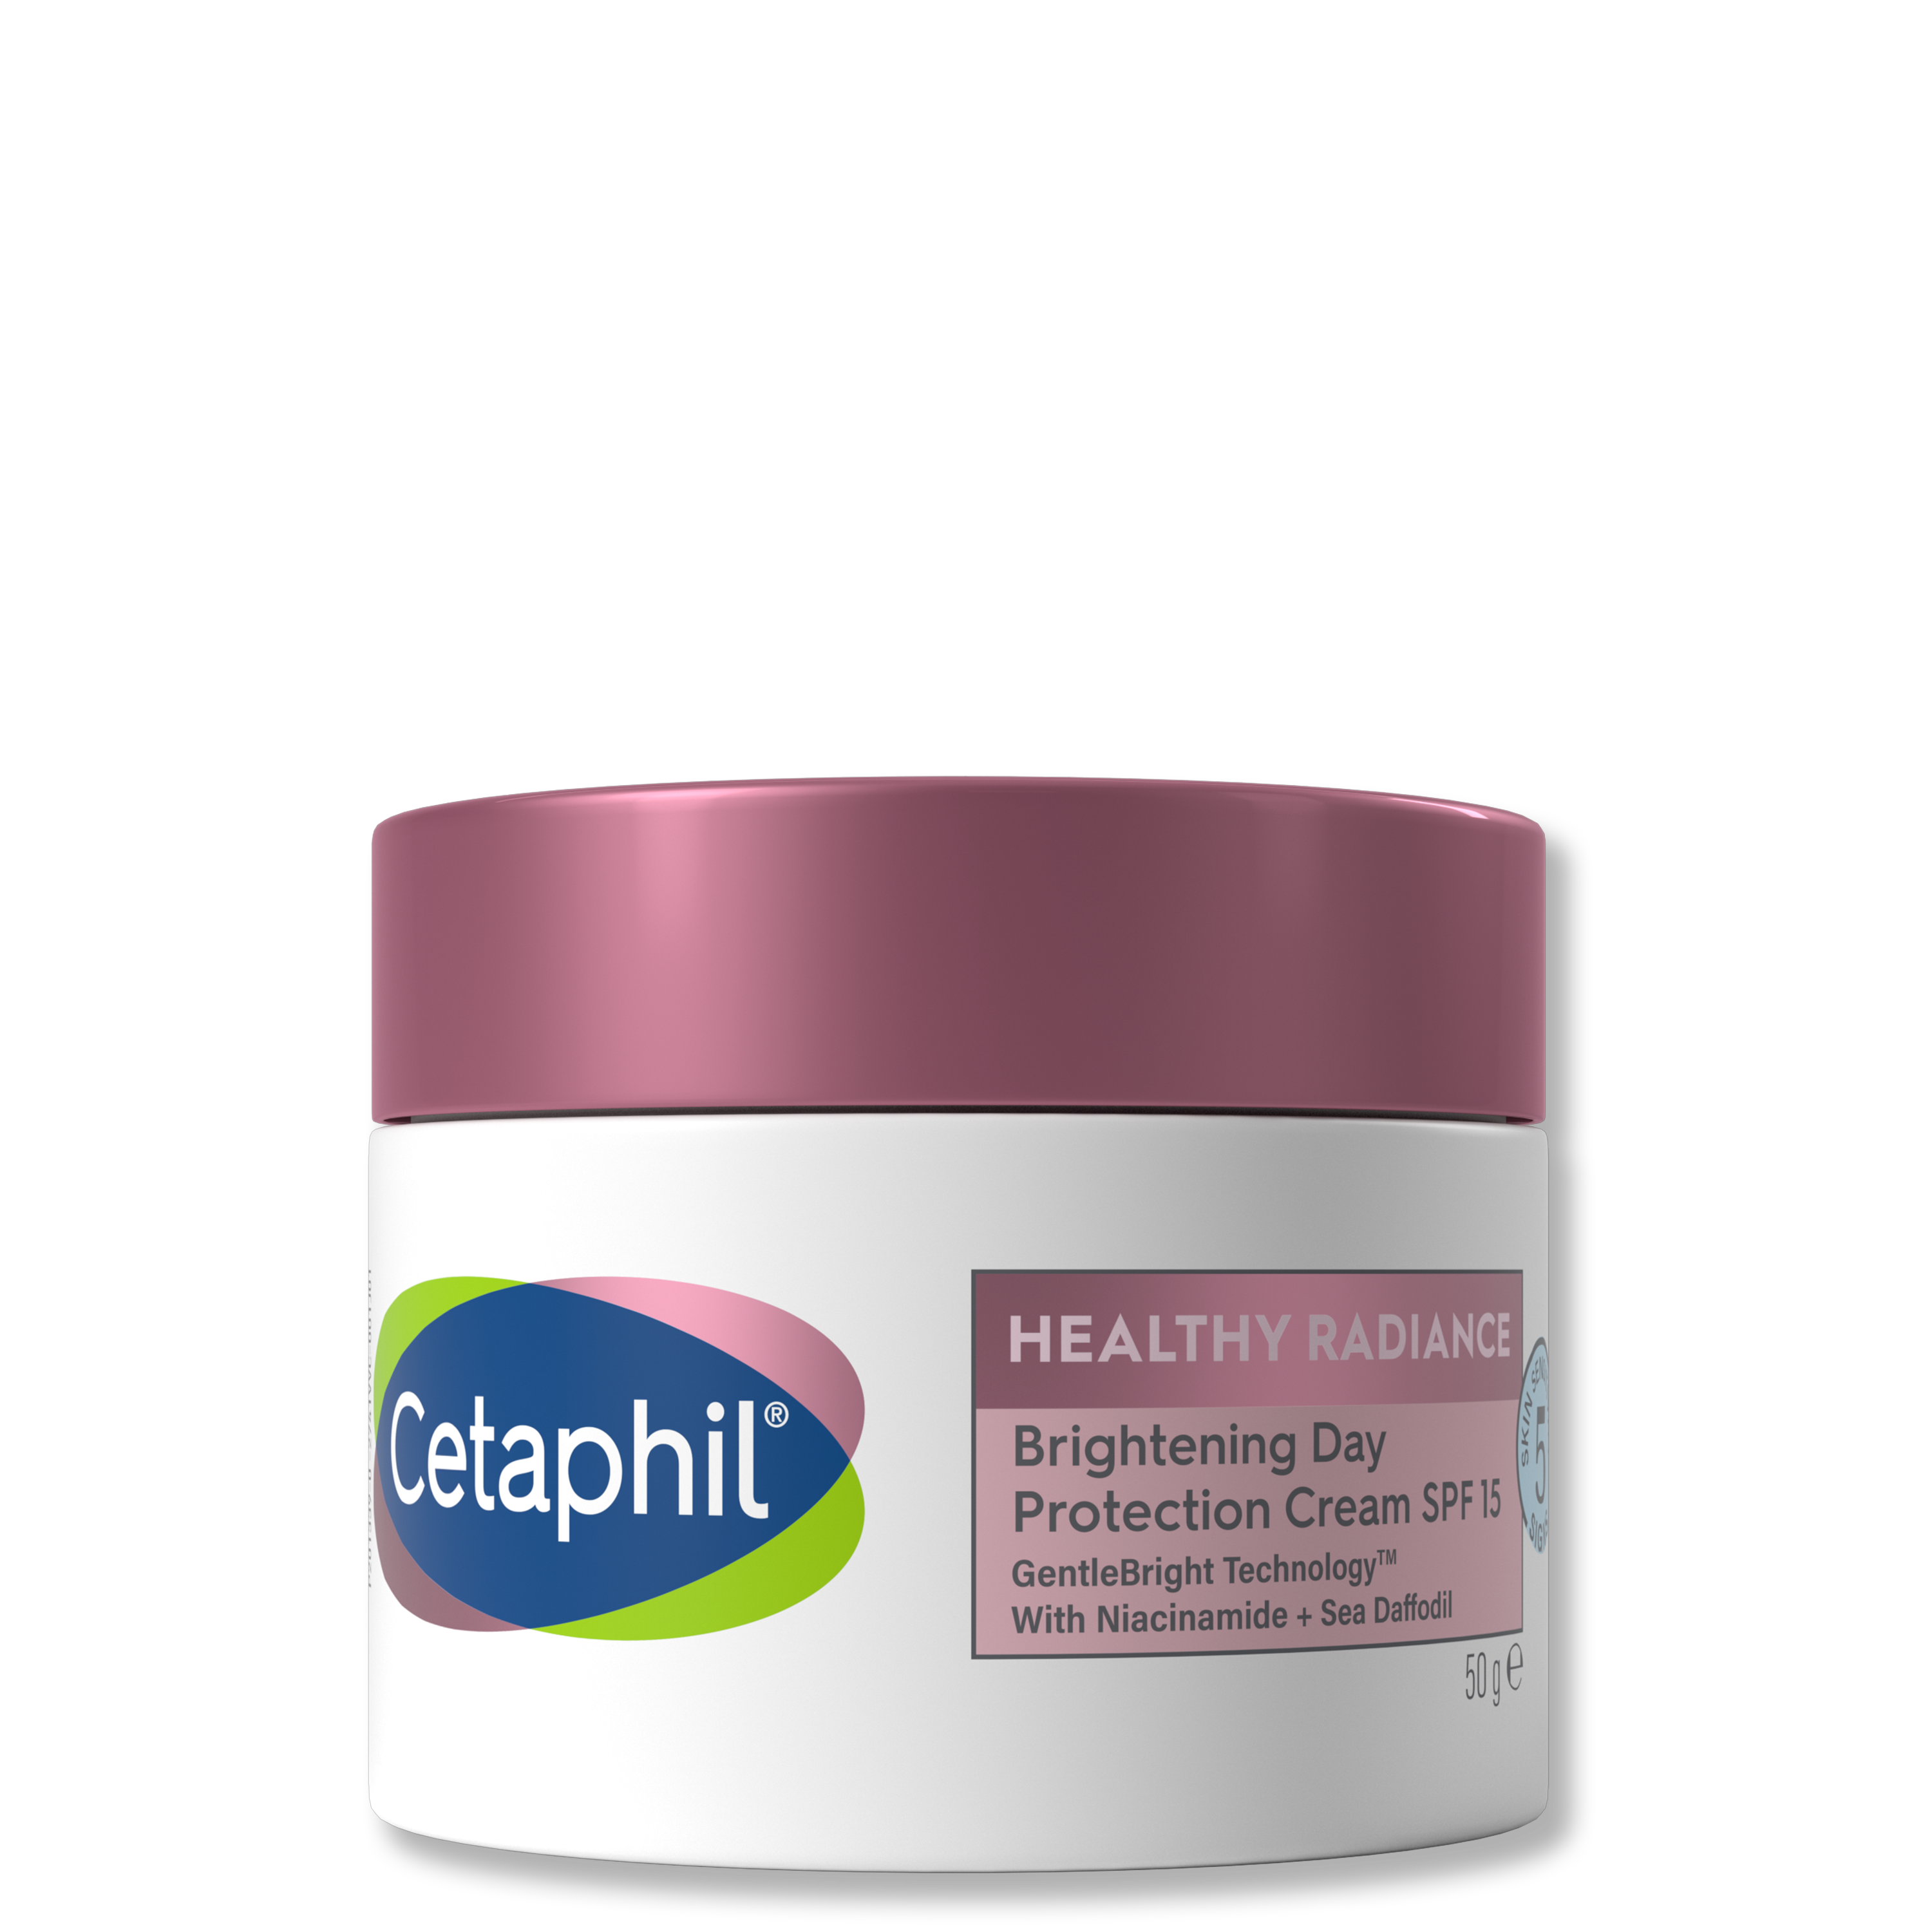 Healthy Radiance Brightening Day Protection Cream SPF15